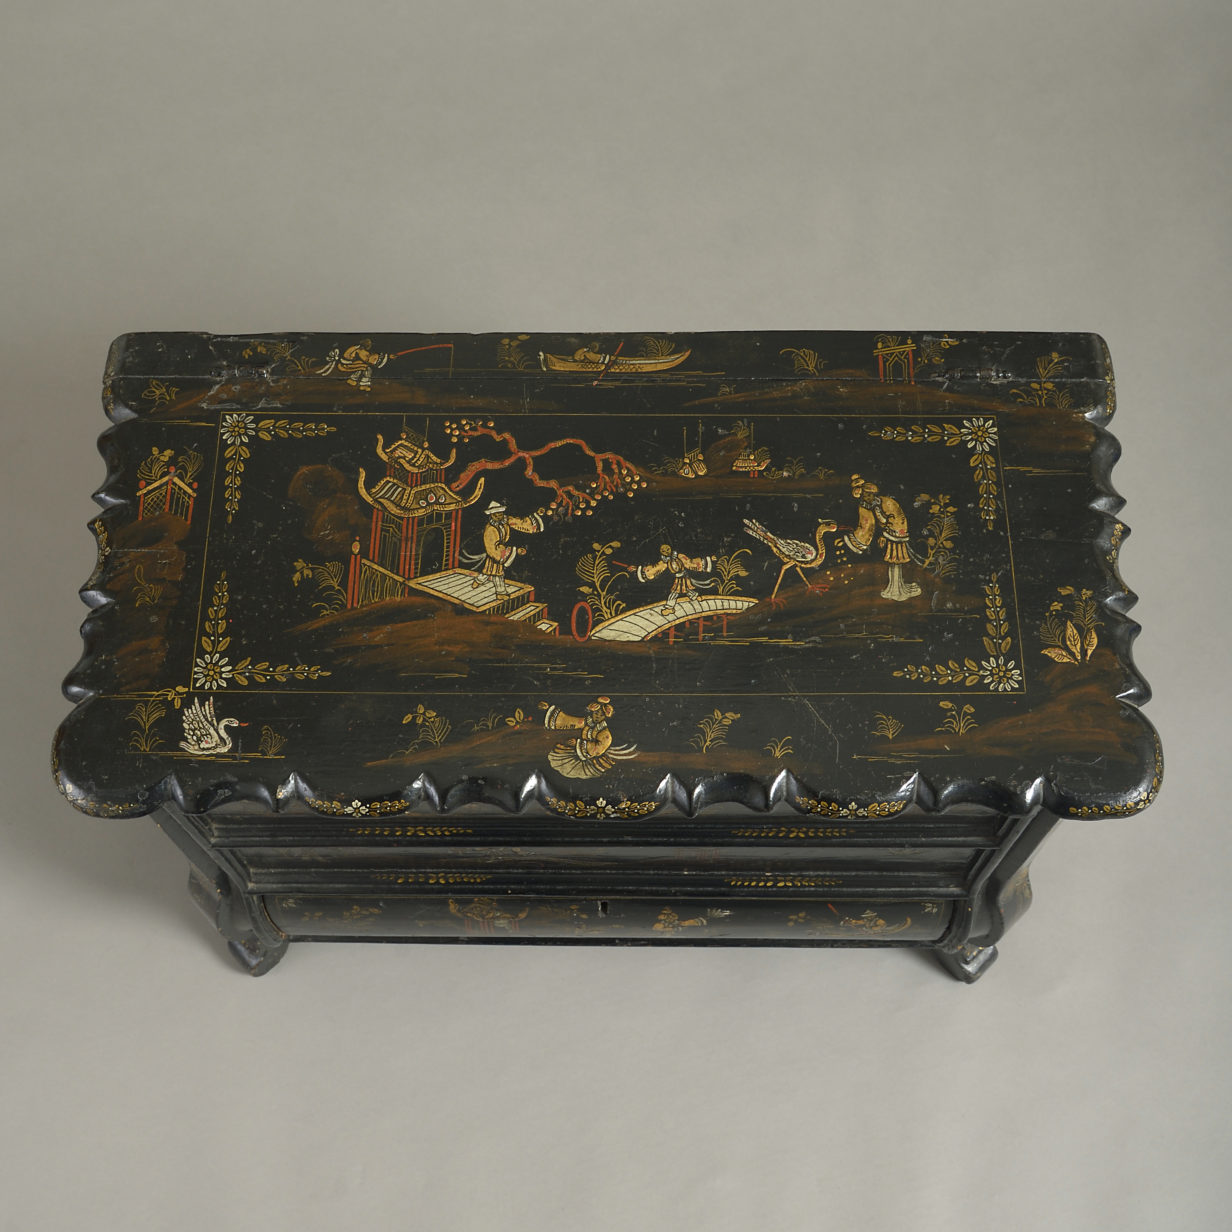 Mid-18th century chinoiserie black japanned work box